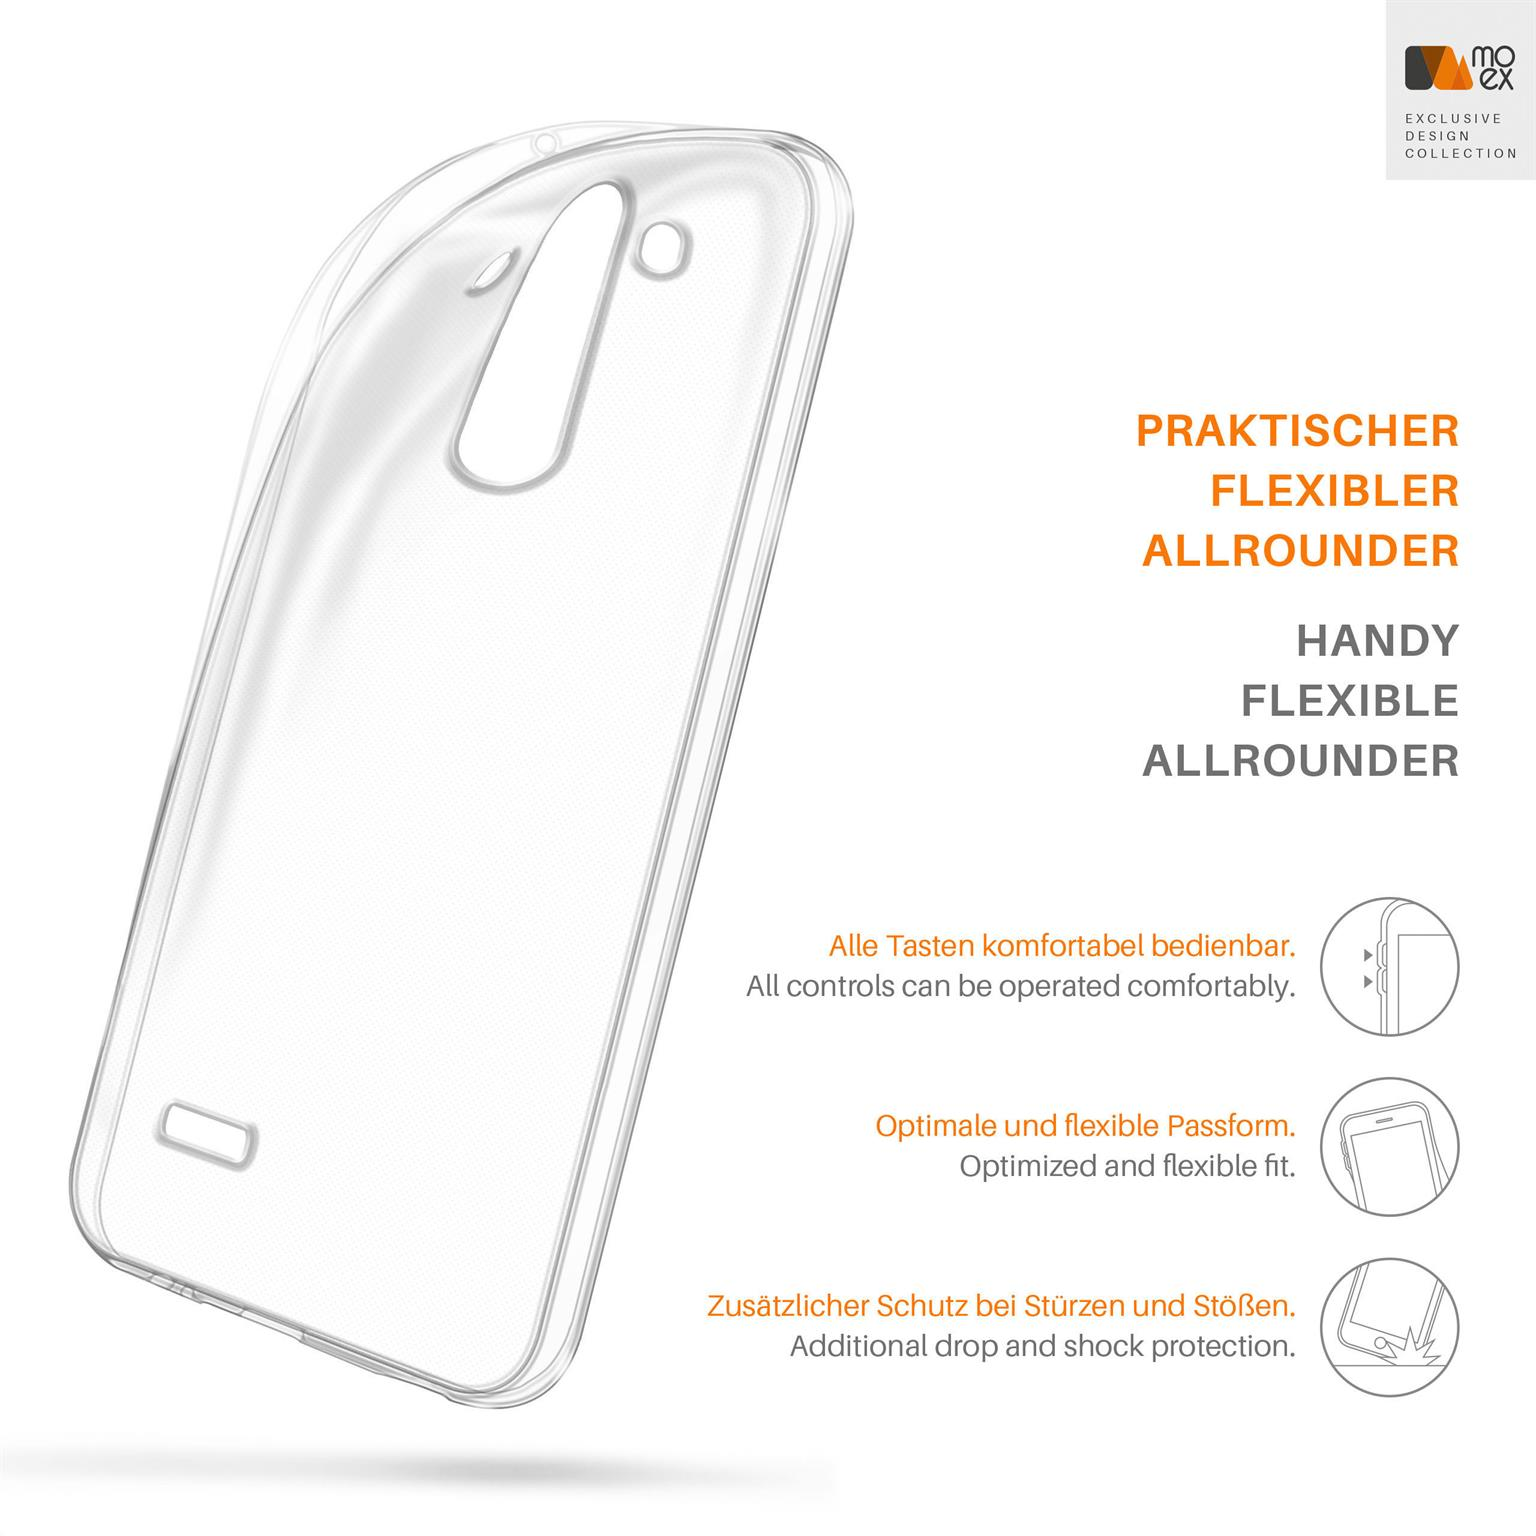 MOEX Aero Case, Crystal-Clear Backcover, G4, LG